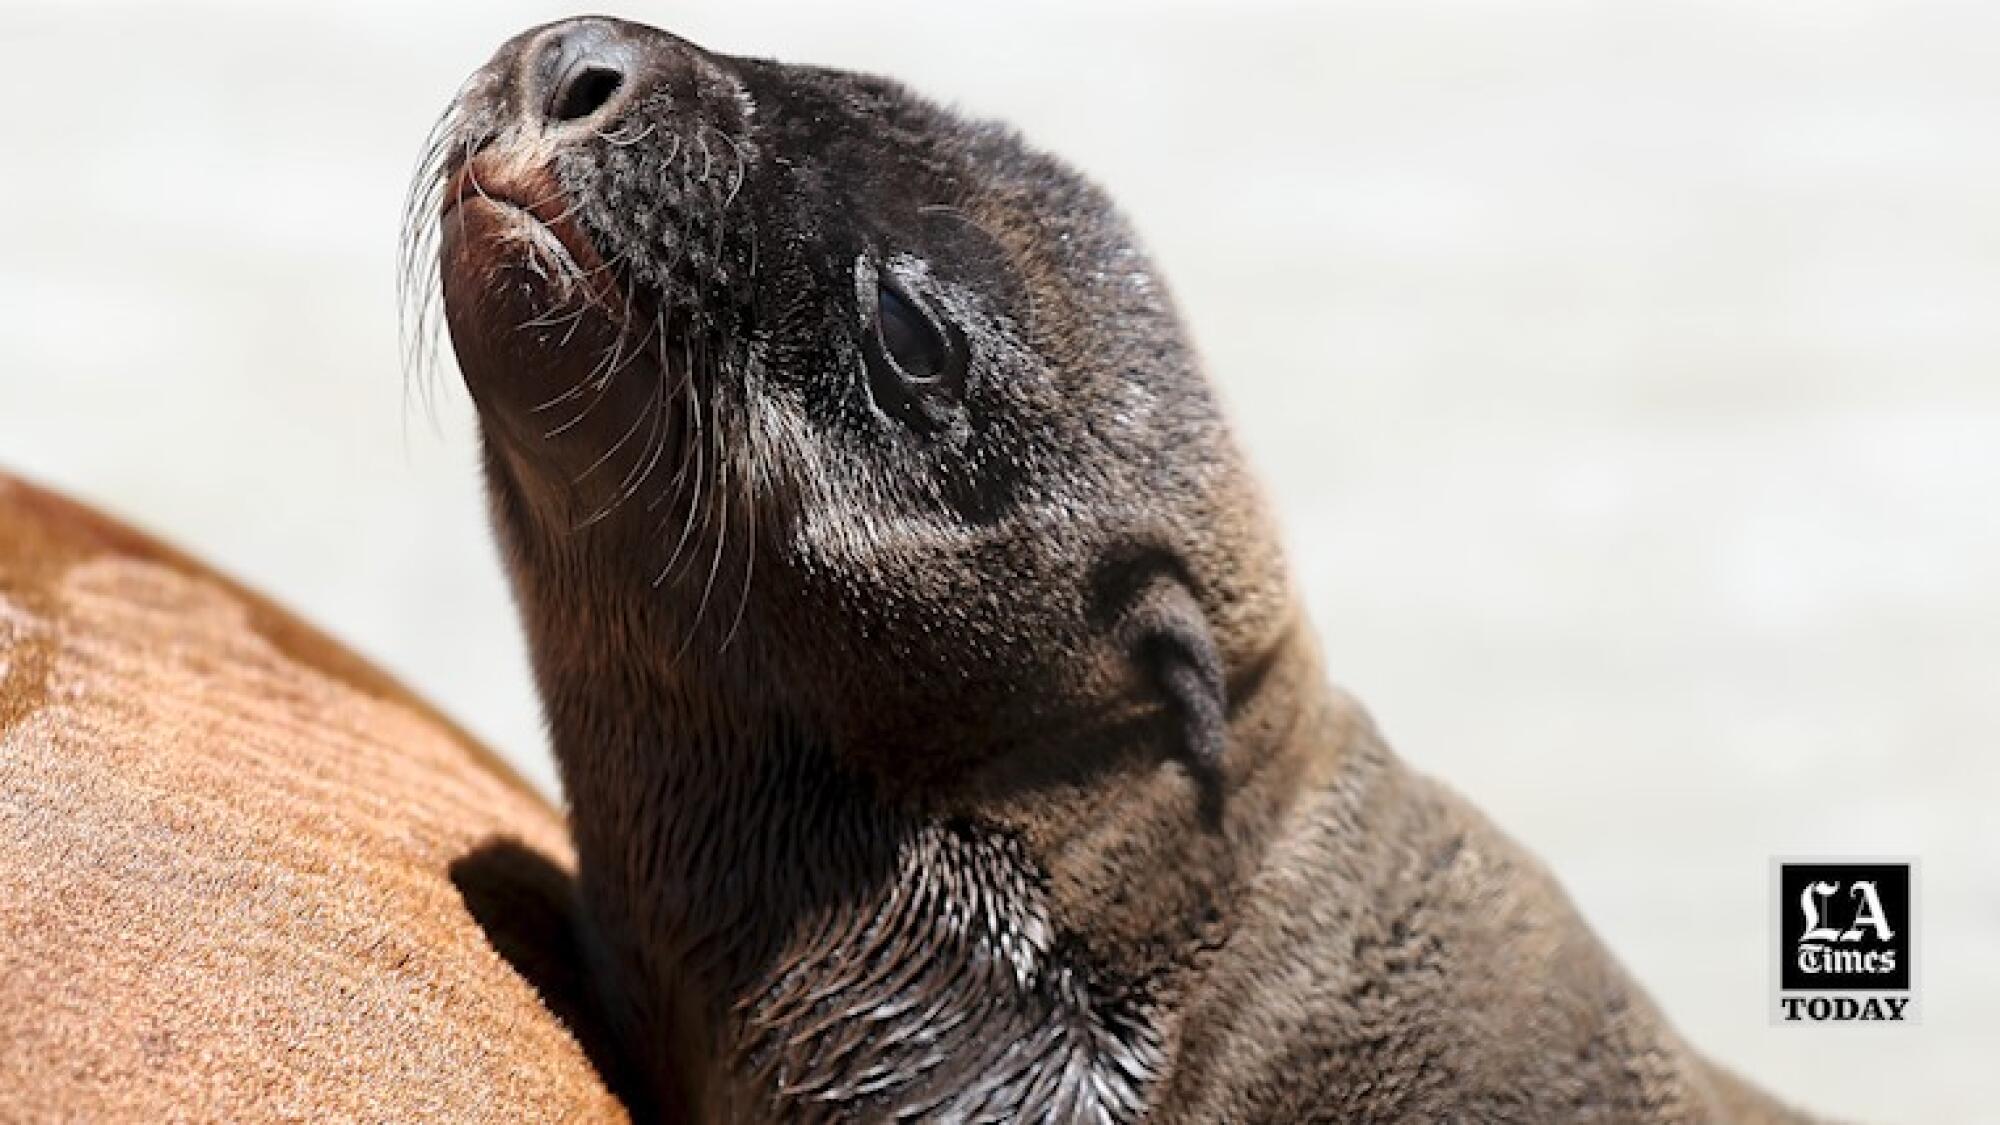 LA Times Today: Beachgoers face an unexpected peril: aggressive, biting sea  lions. Here's what you can do - Los Angeles Times